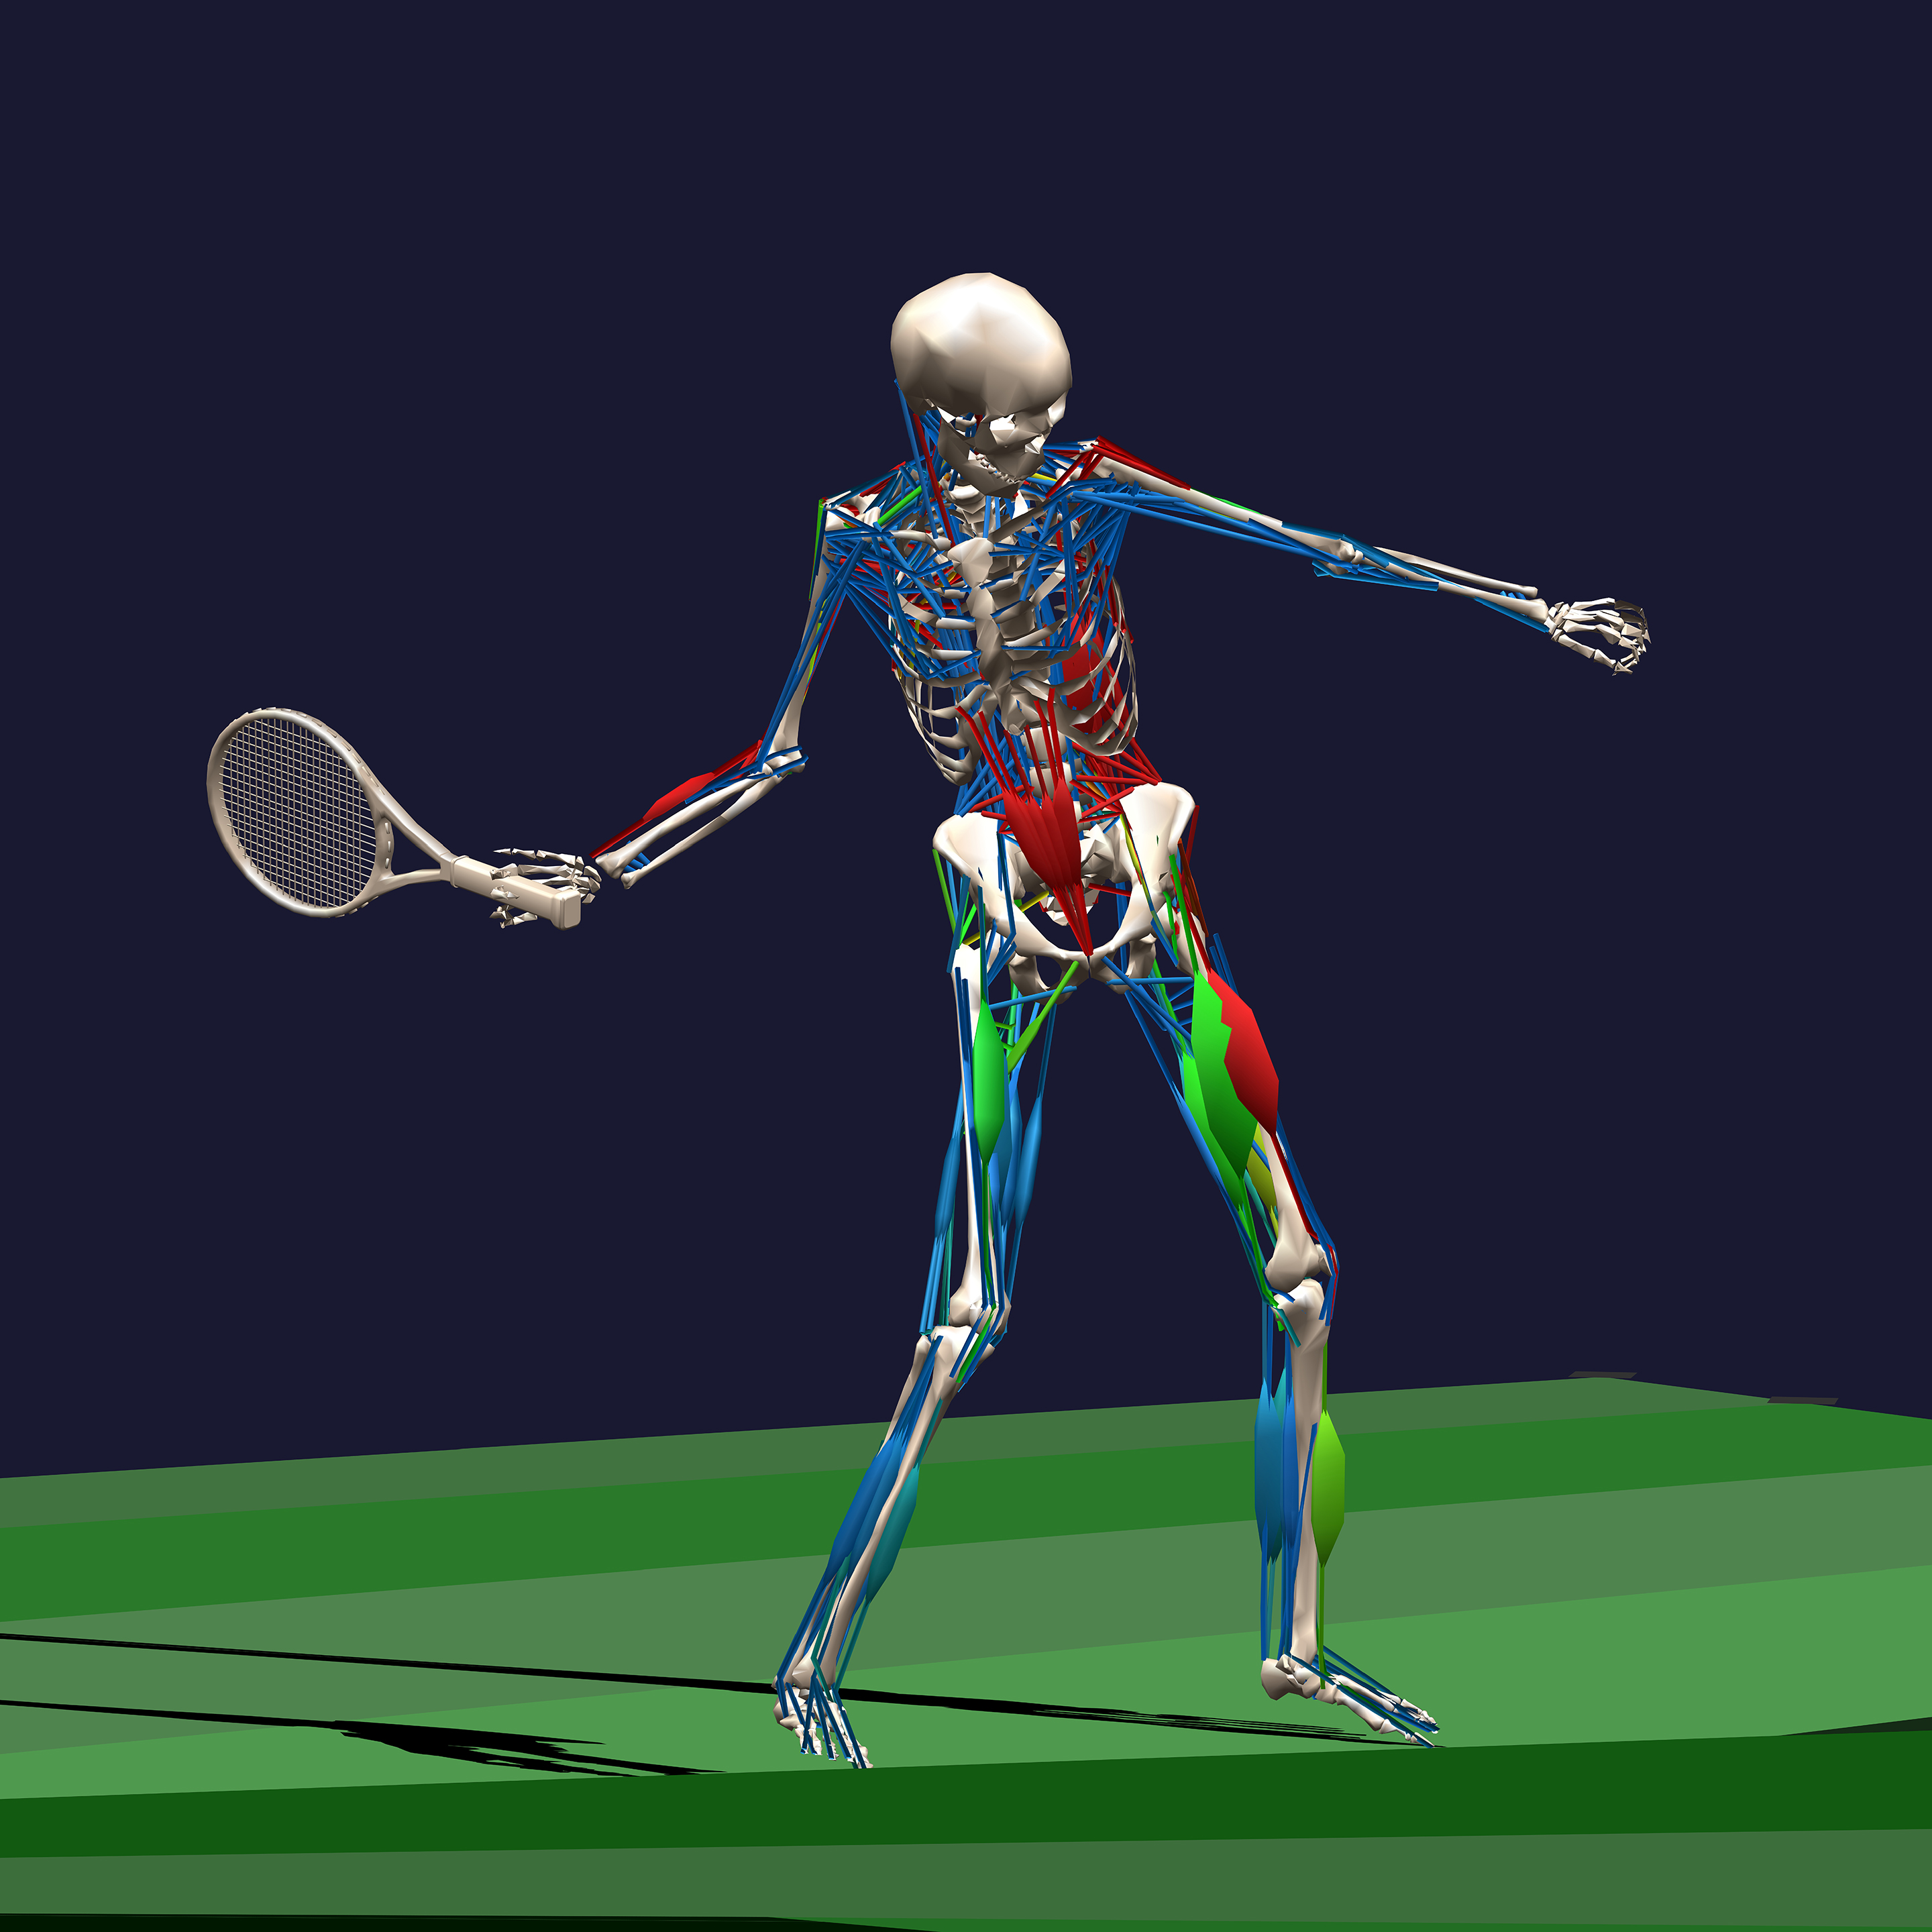 A still from the motion capture footage